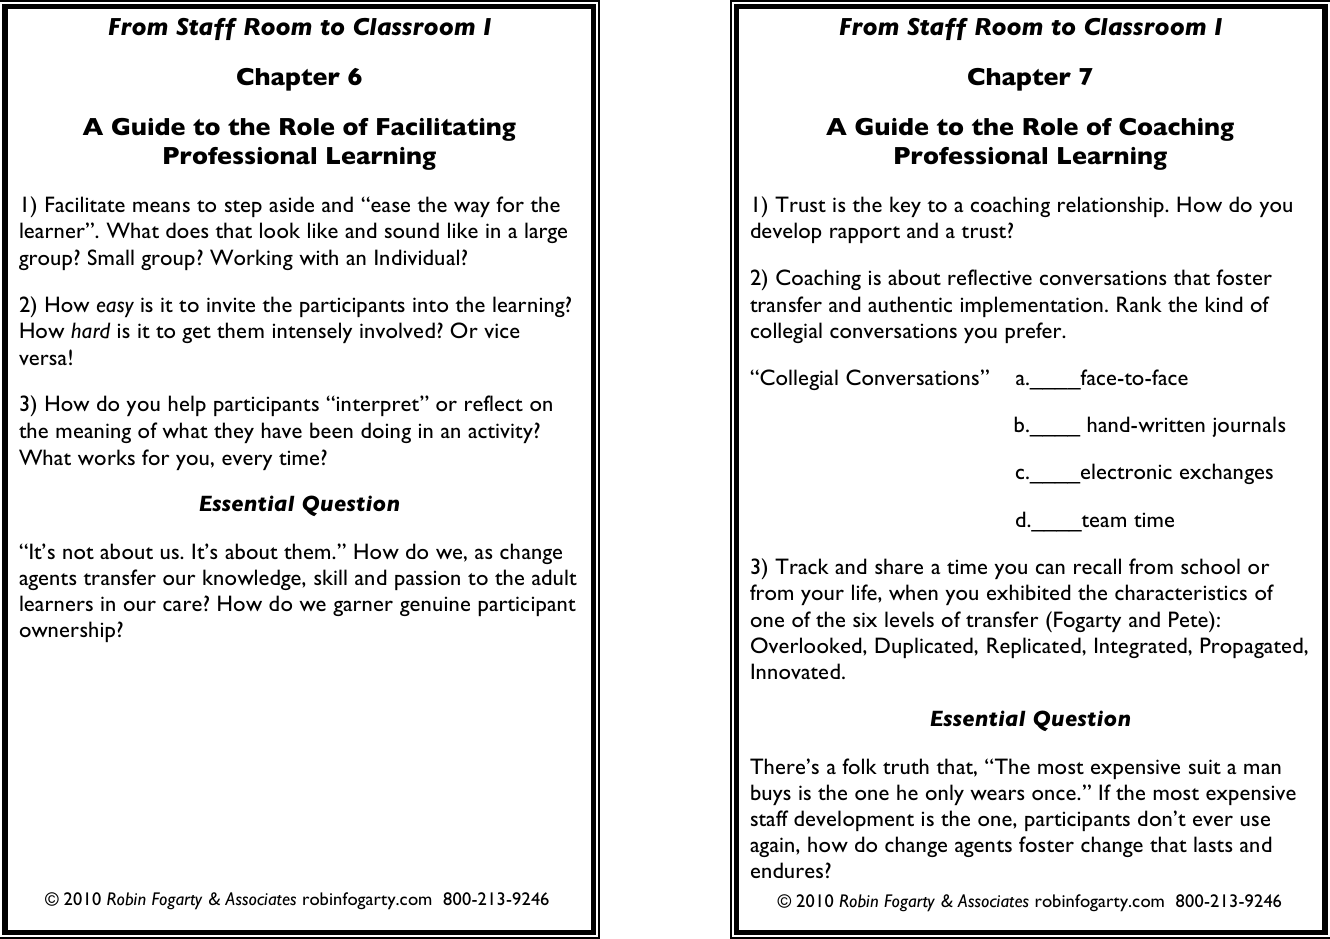 Page 4 of 6 - DiscussionGuide Staff Class Discussion Guide